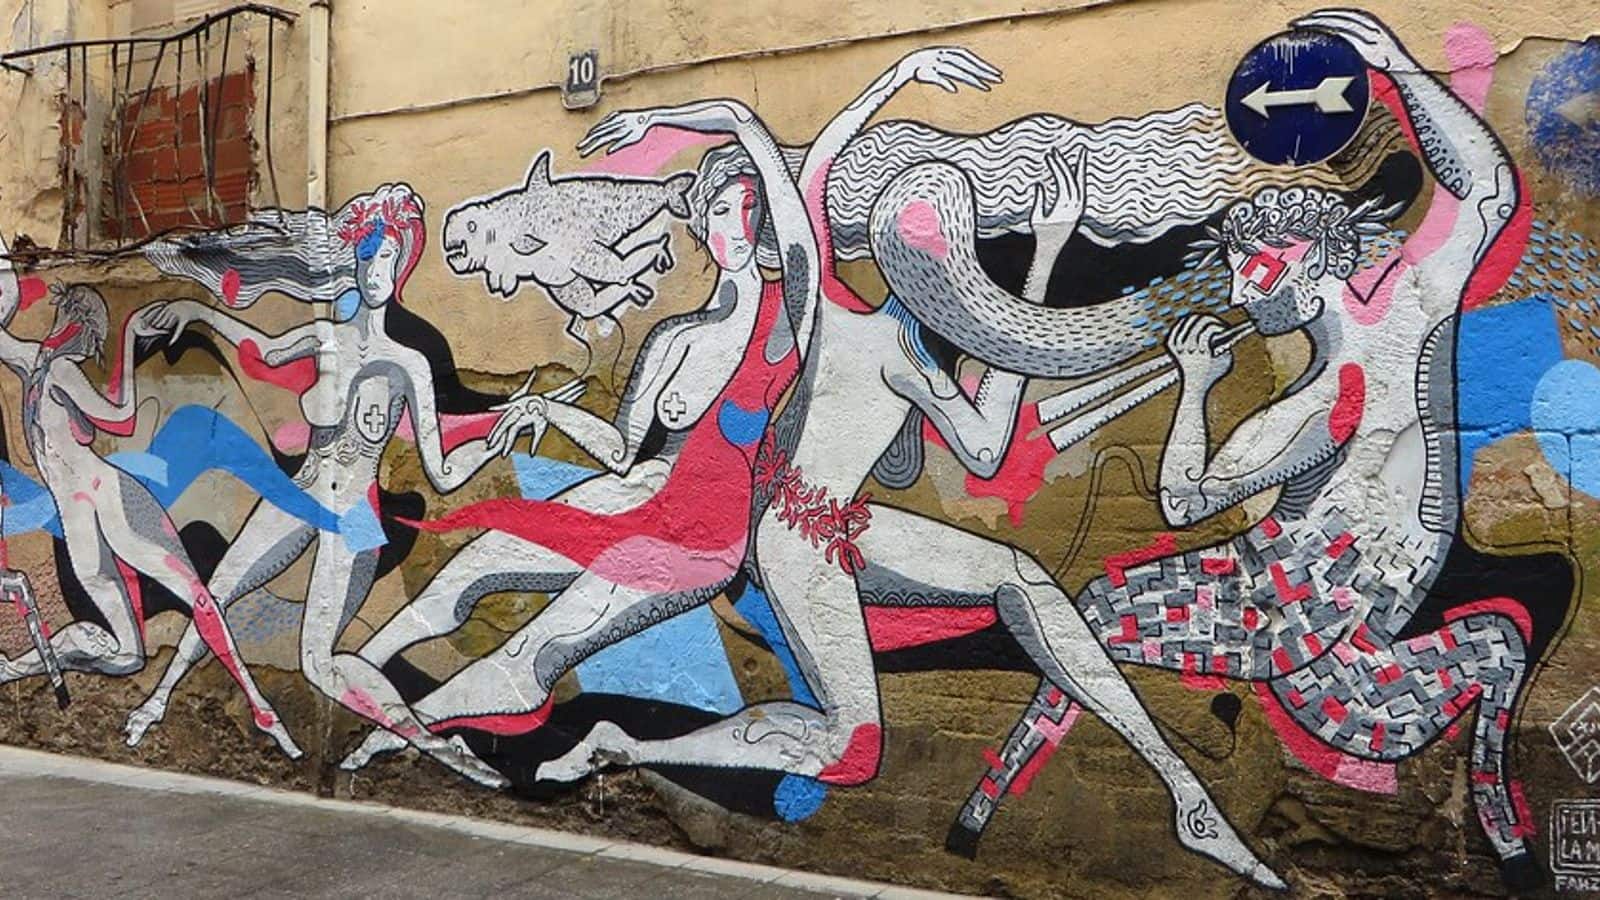 Valencia's street art splendor is an attraction you can't miss